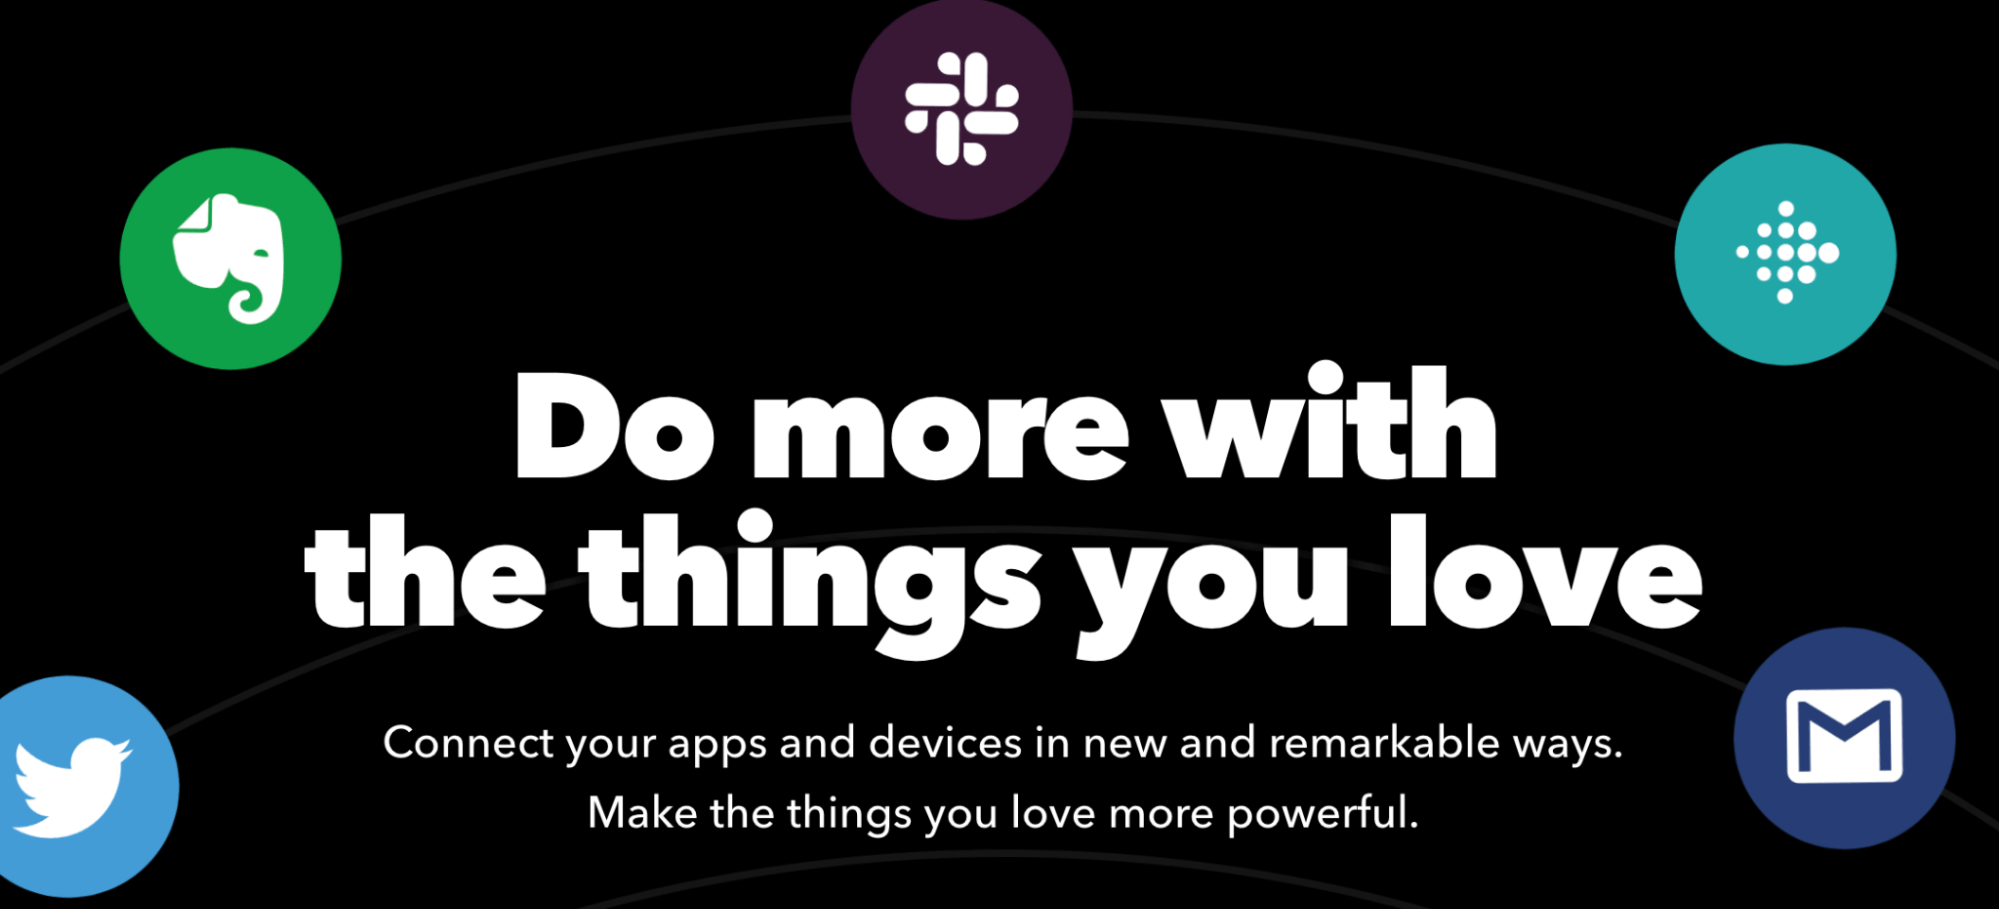 Do more with the things you love